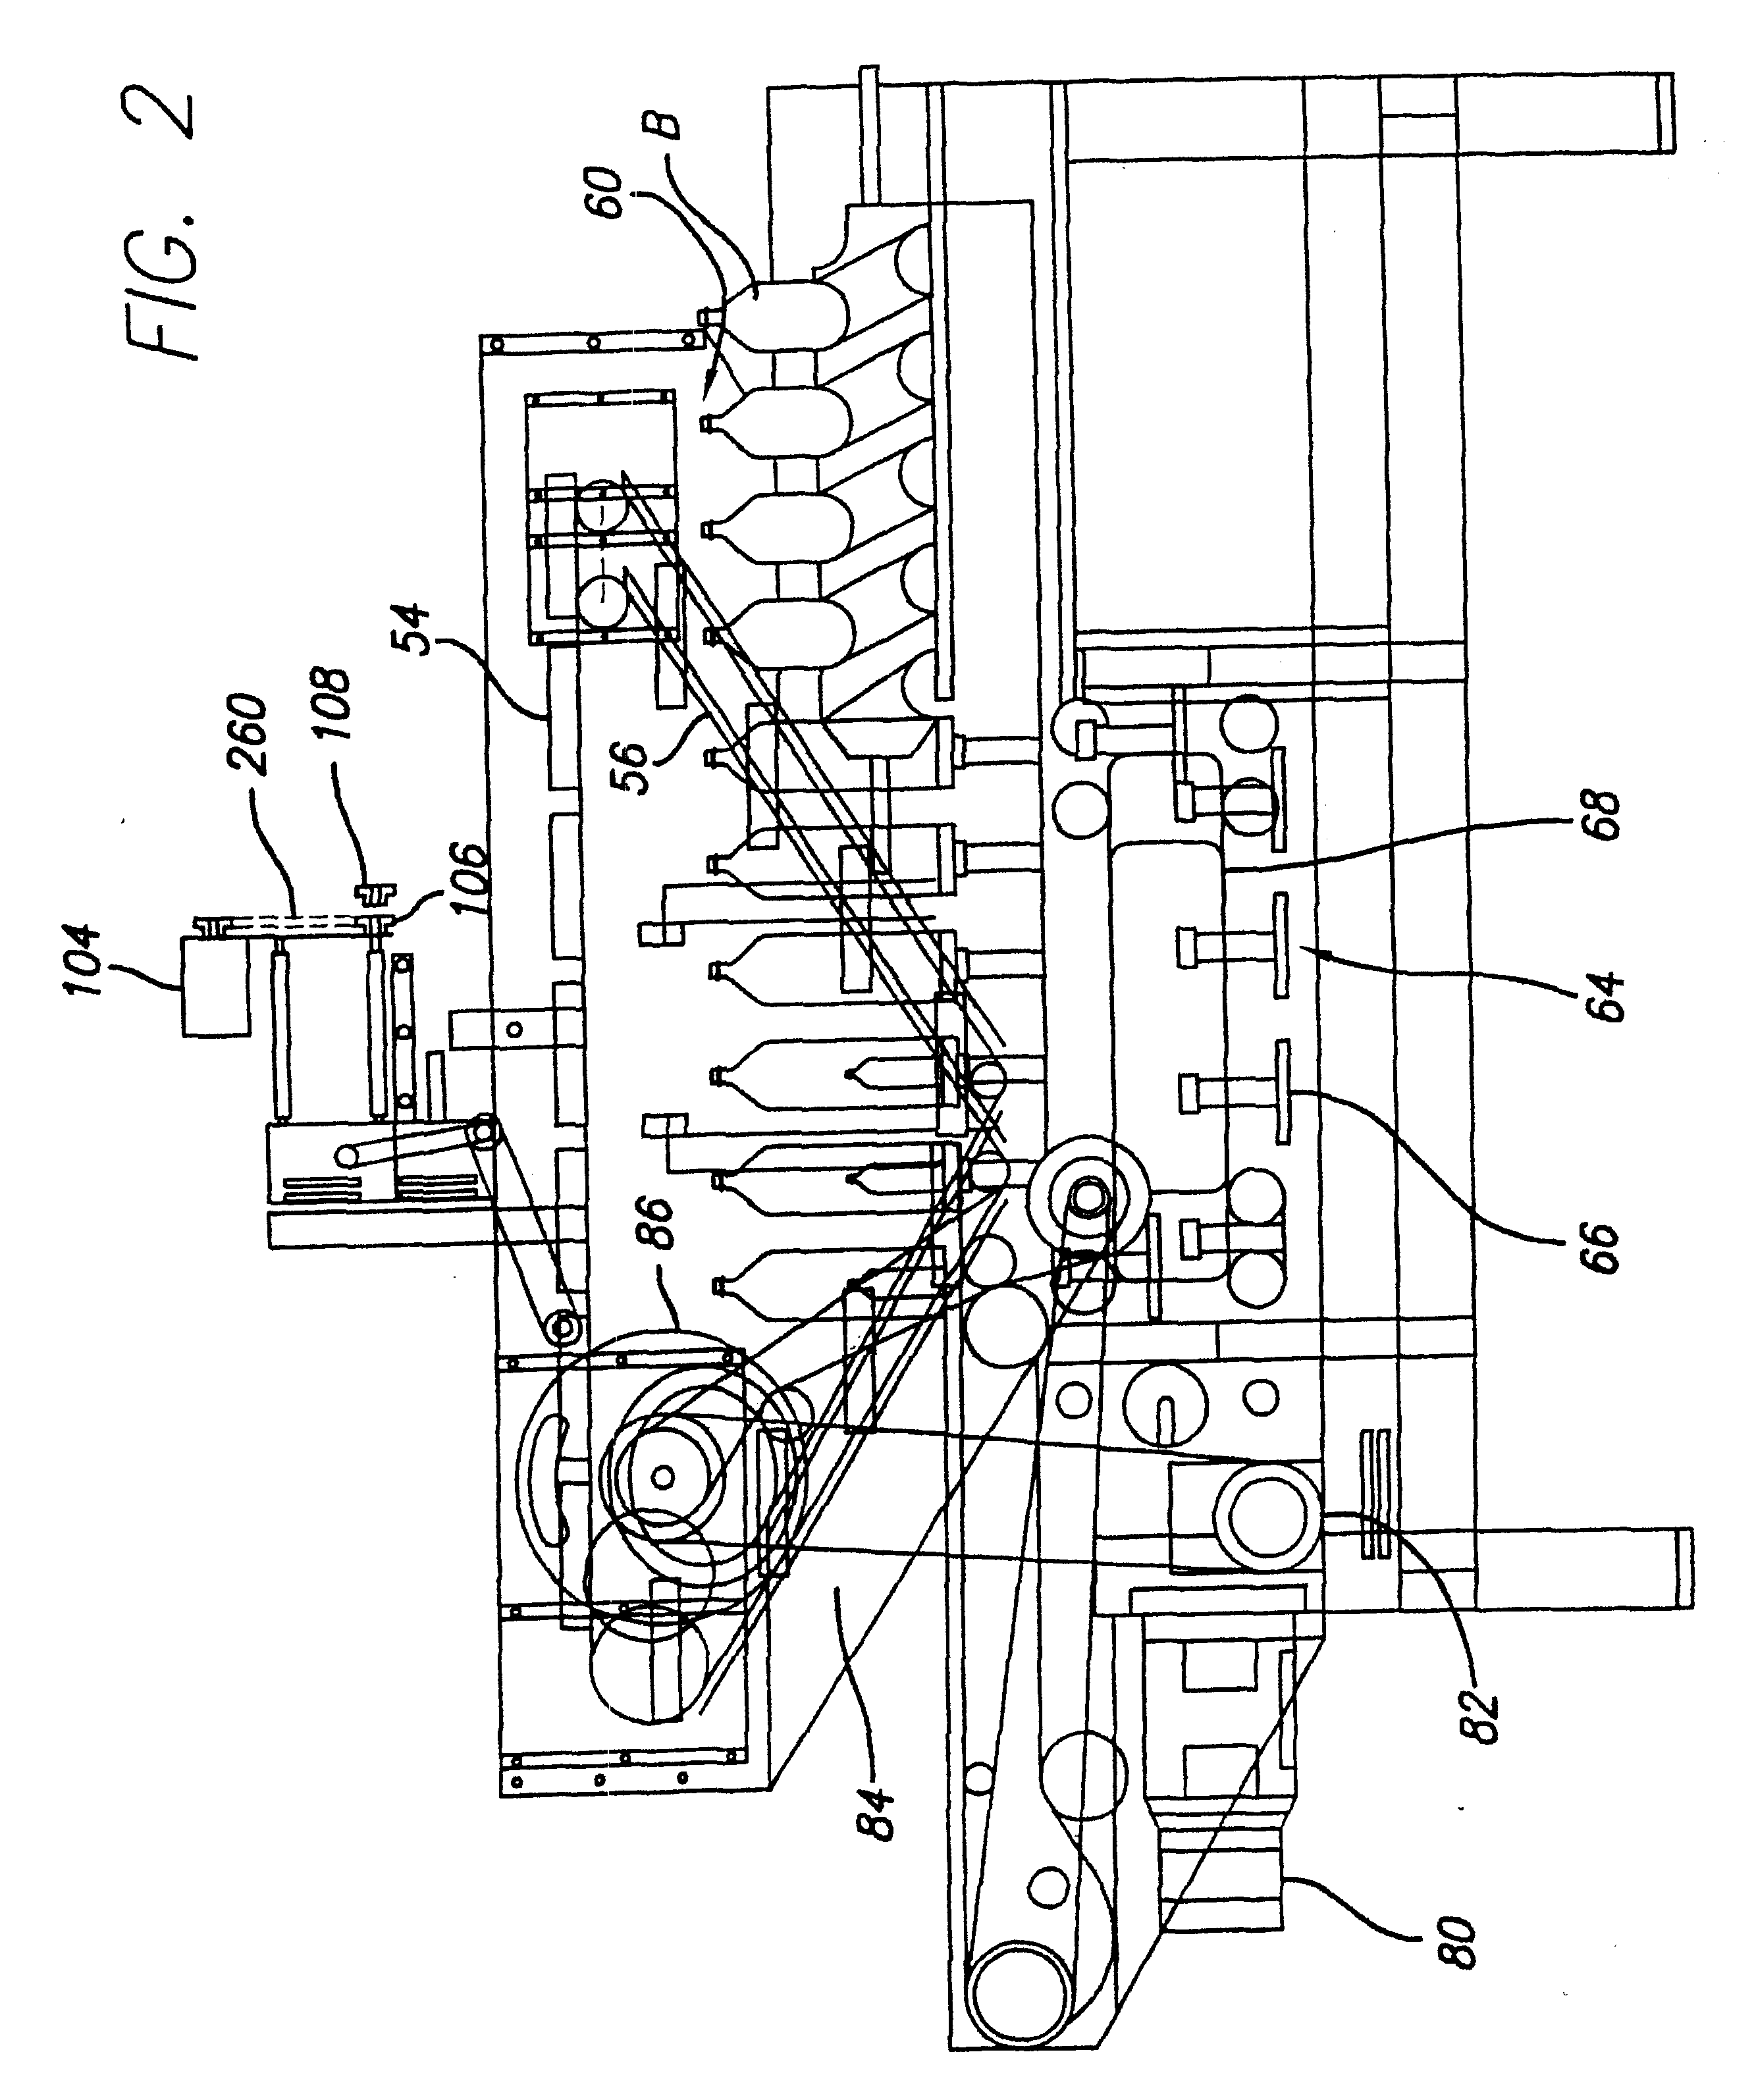 In-line continuous feed sleeve labeling machine and method